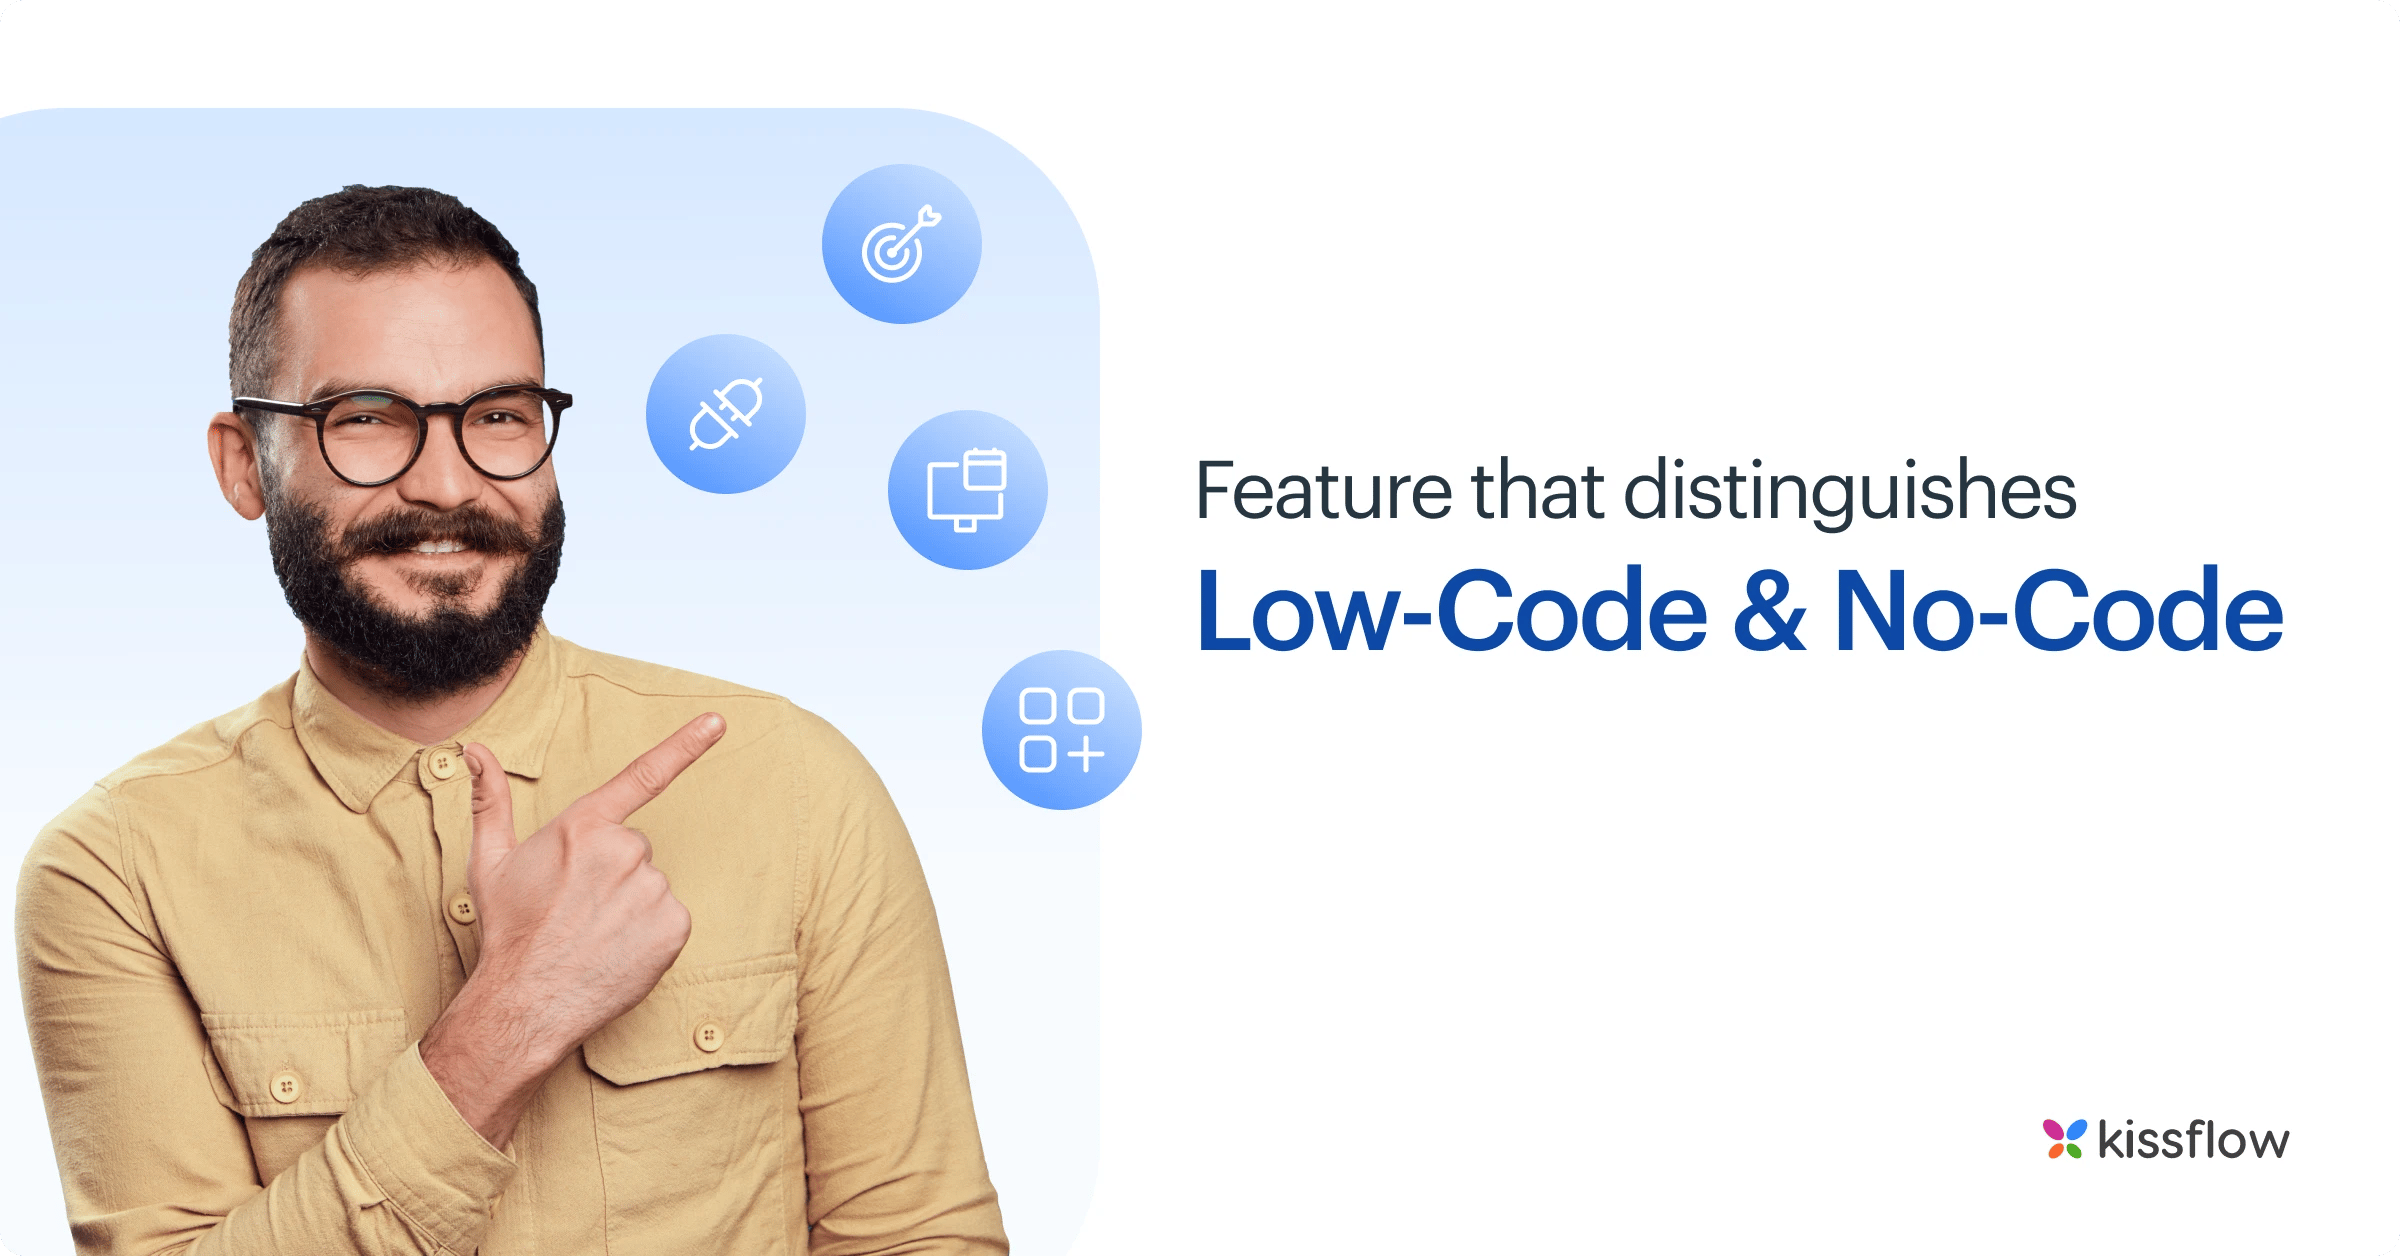 basic_feature_differences_between_low_code_and_no_code